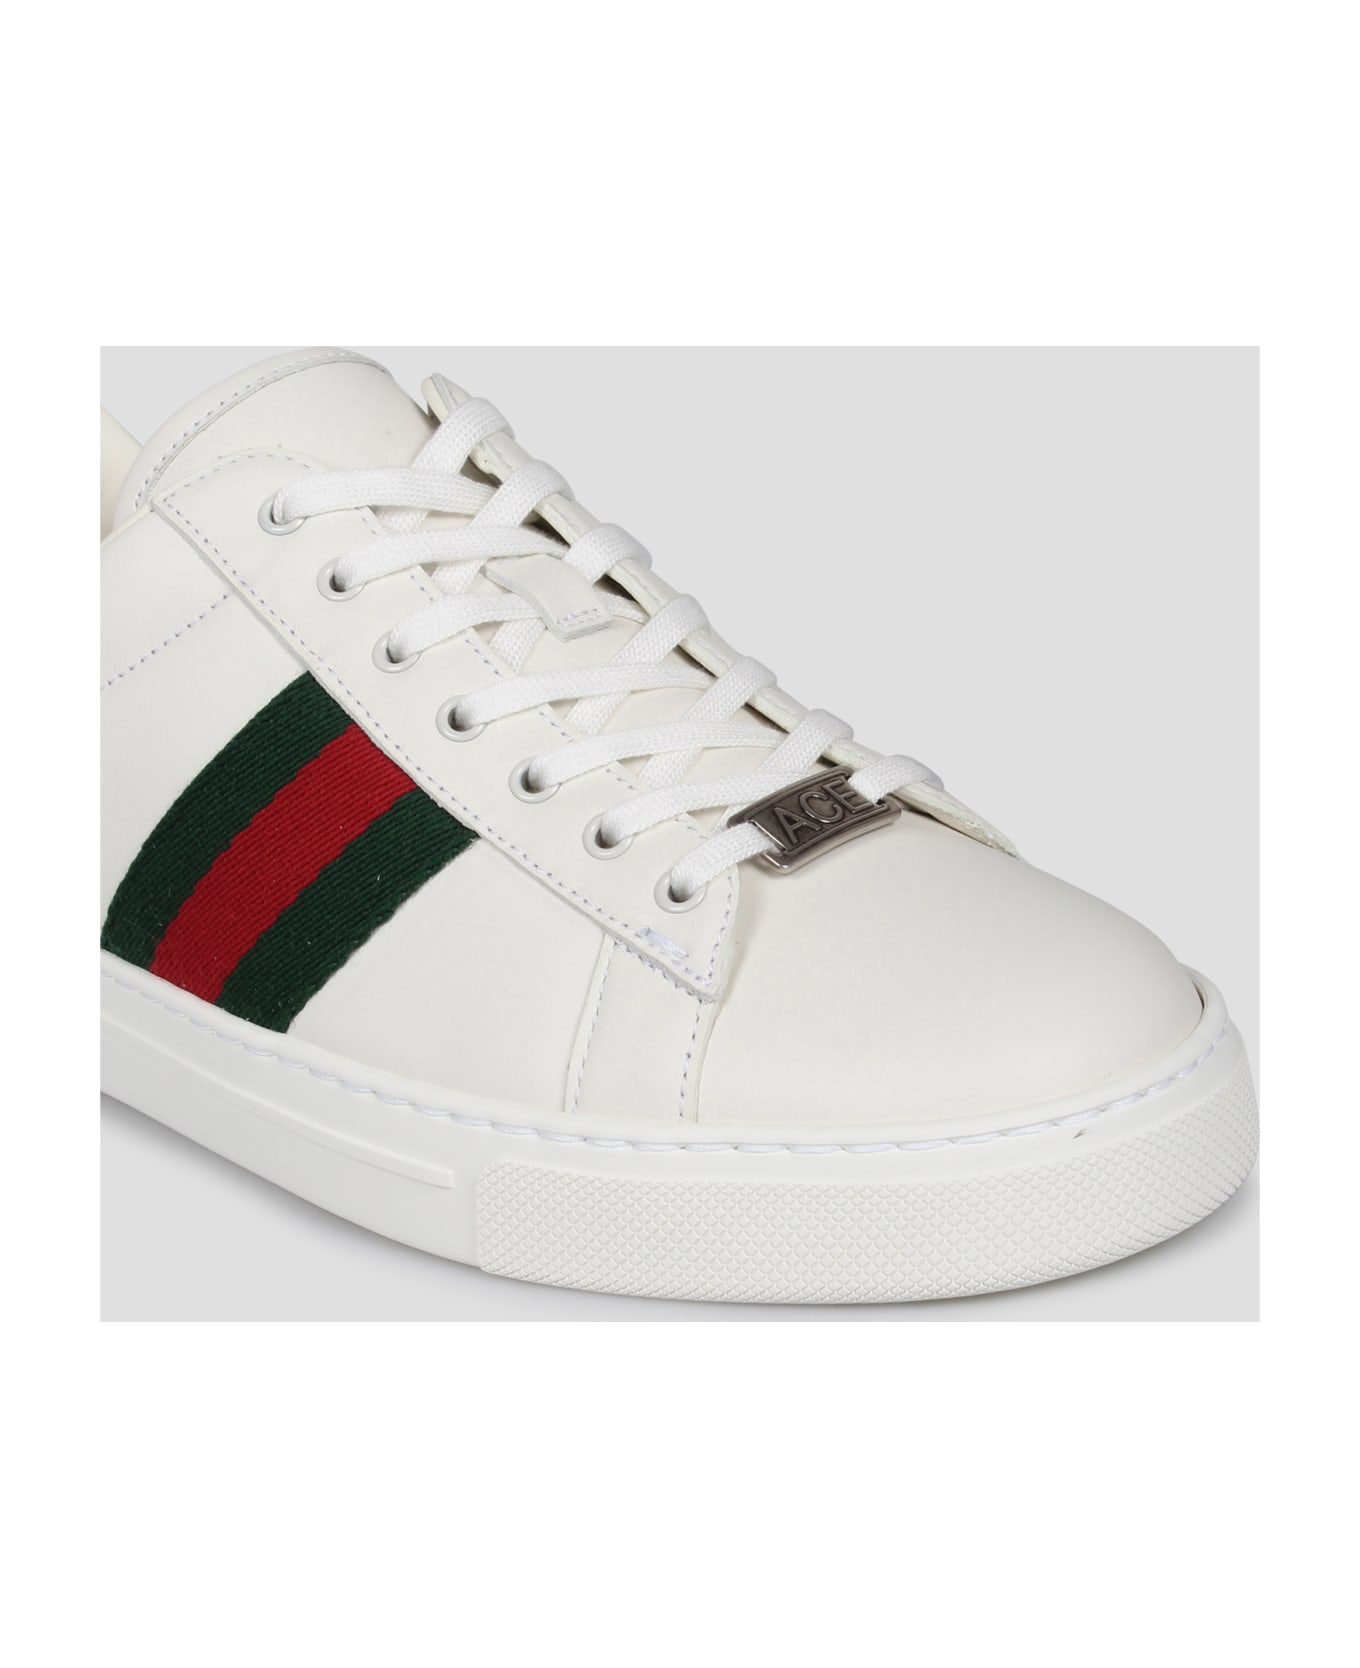 Gucci Ace Sneakers | italist